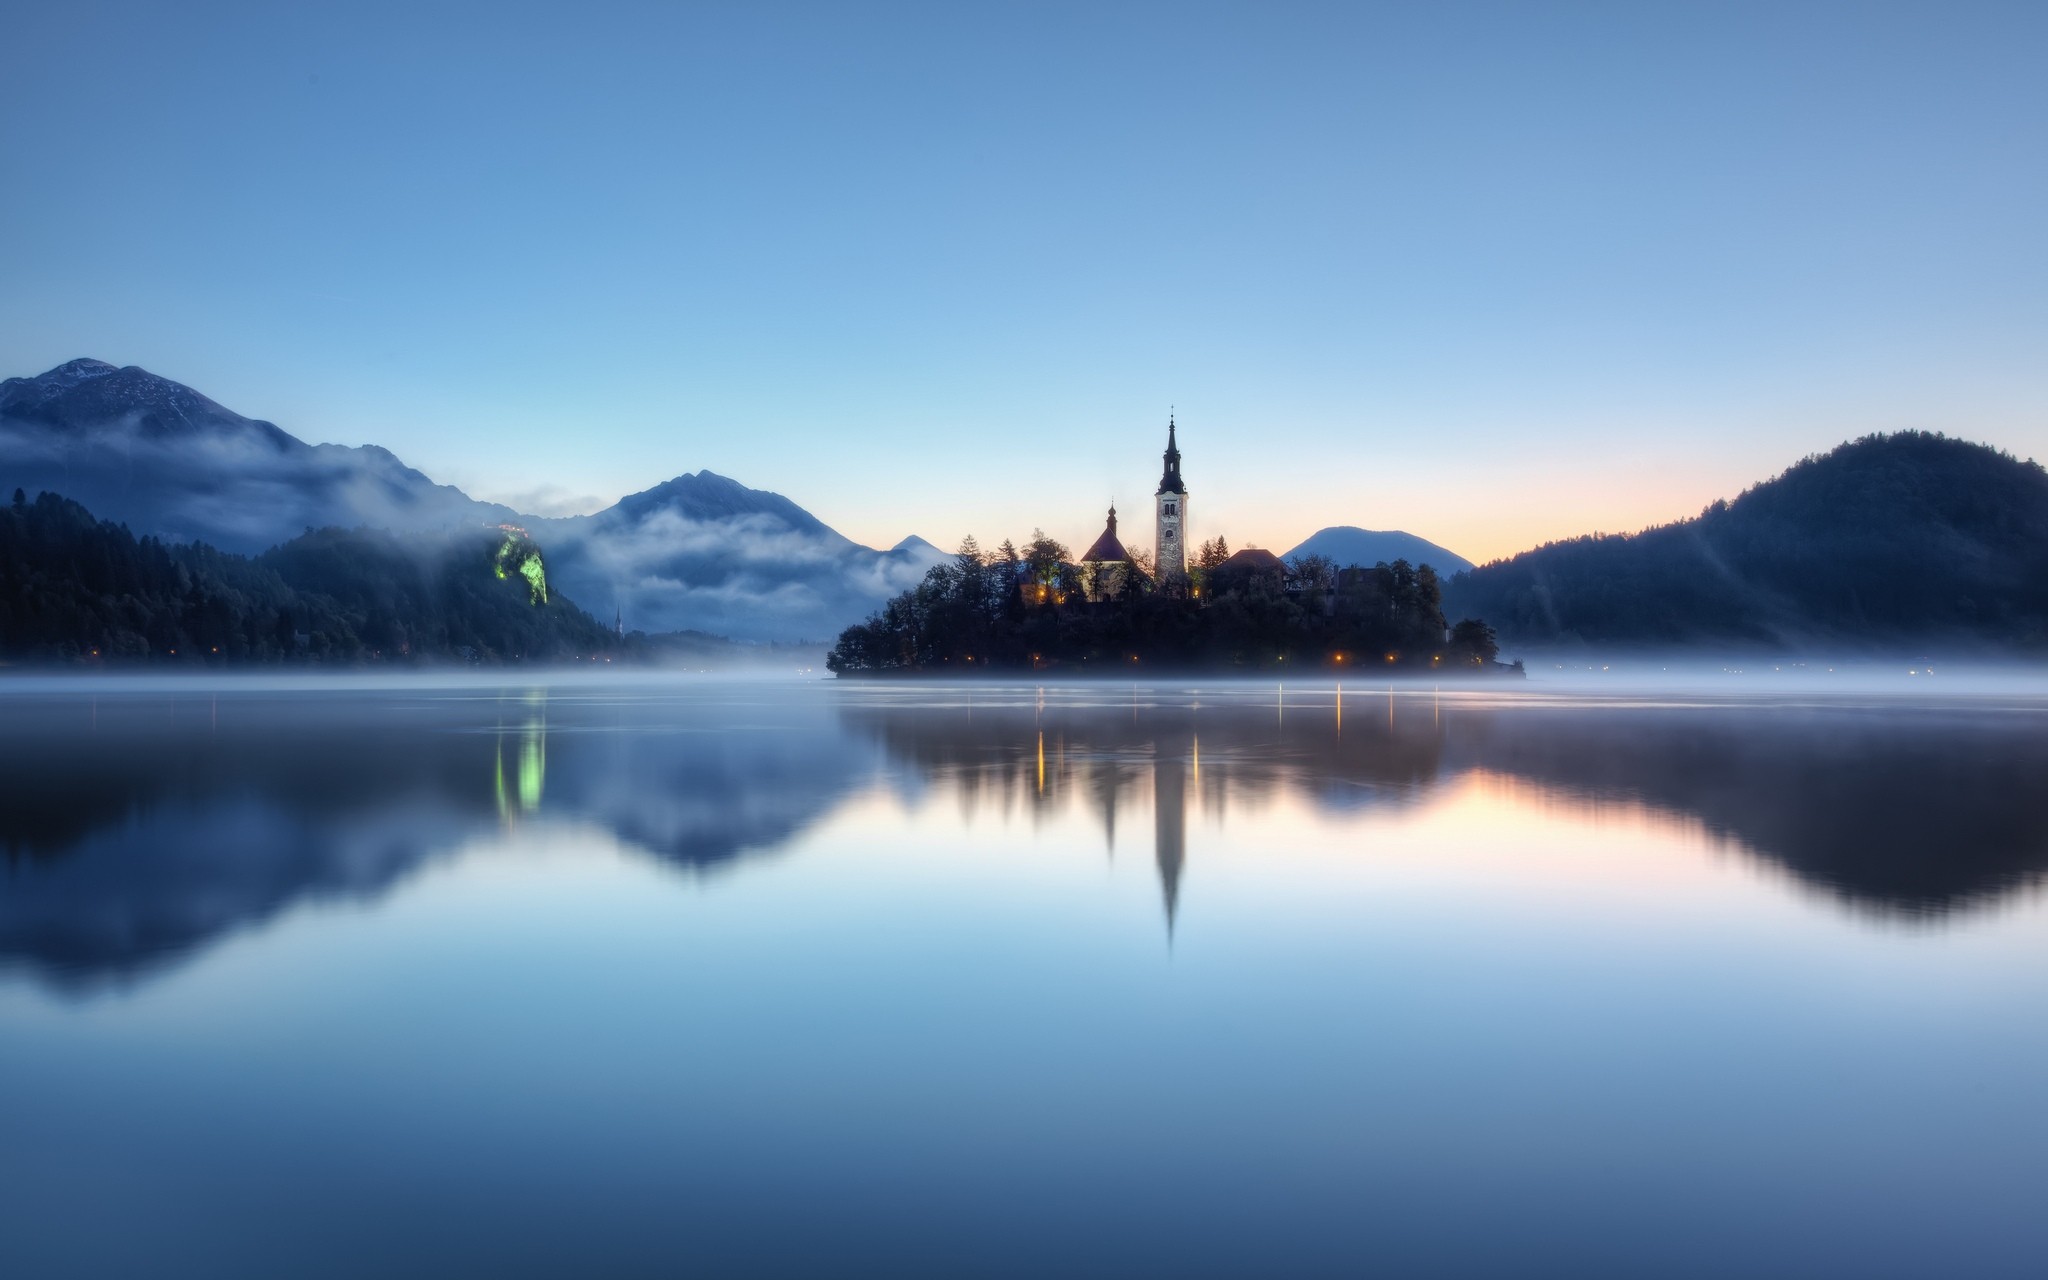 General 2048x1280 photography nature Slovenia lake island church water landscape calm waters calm Lake Bled